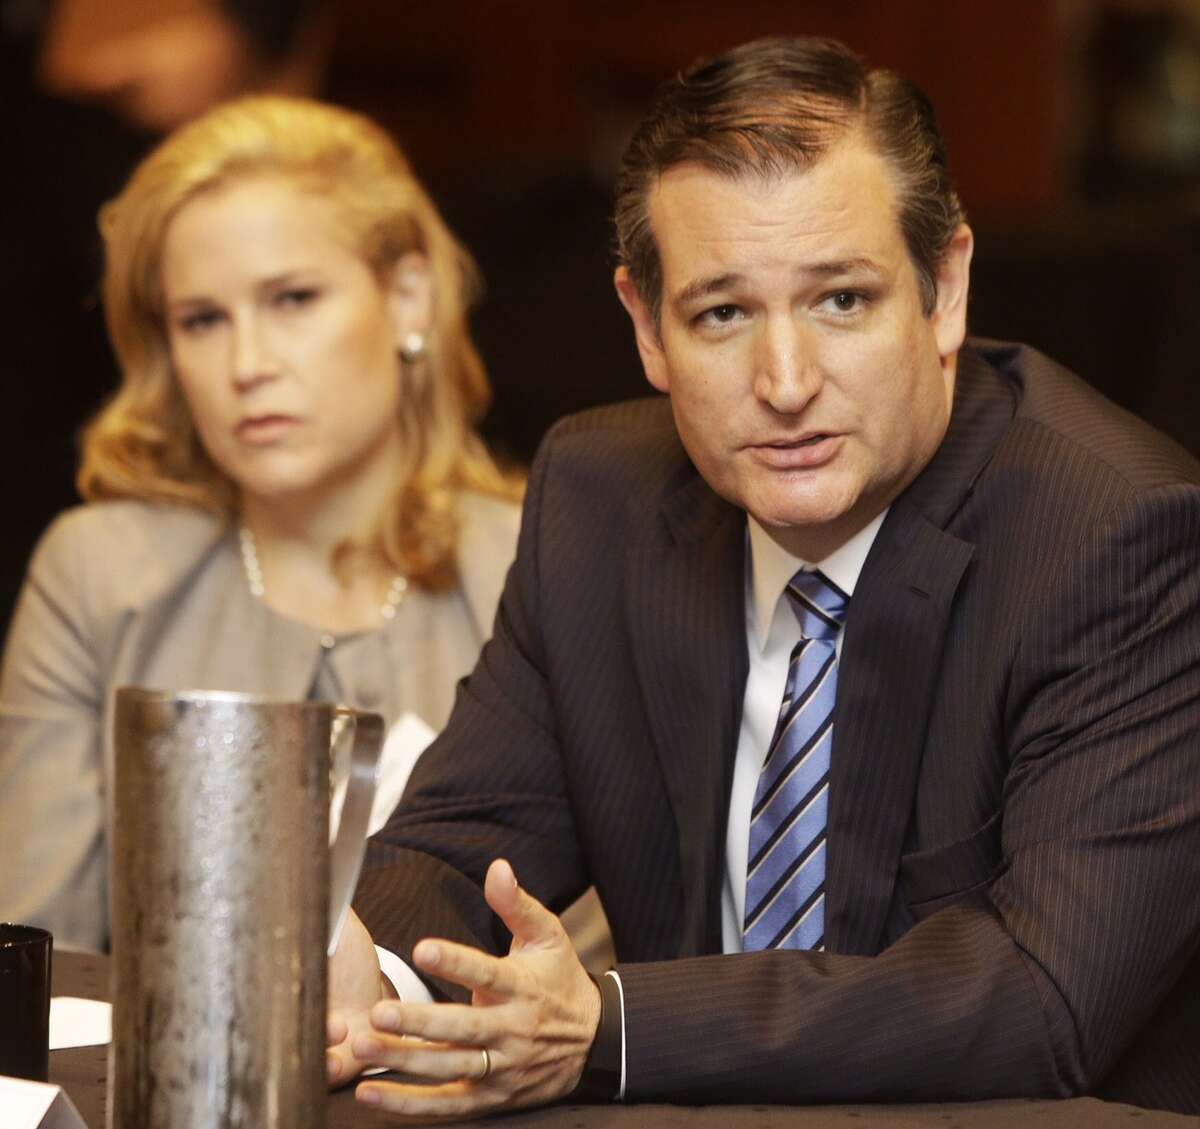 Heidi Cruz, left, and Sen. Ted Cruz, are shown during a VIP session before the Greater Houston Partnership's annual State of the Senate luncheon where Cruz will be the keynote speaker at Omni Hotel, Four Riverway, Tuesday, Sept. 1, 2015.